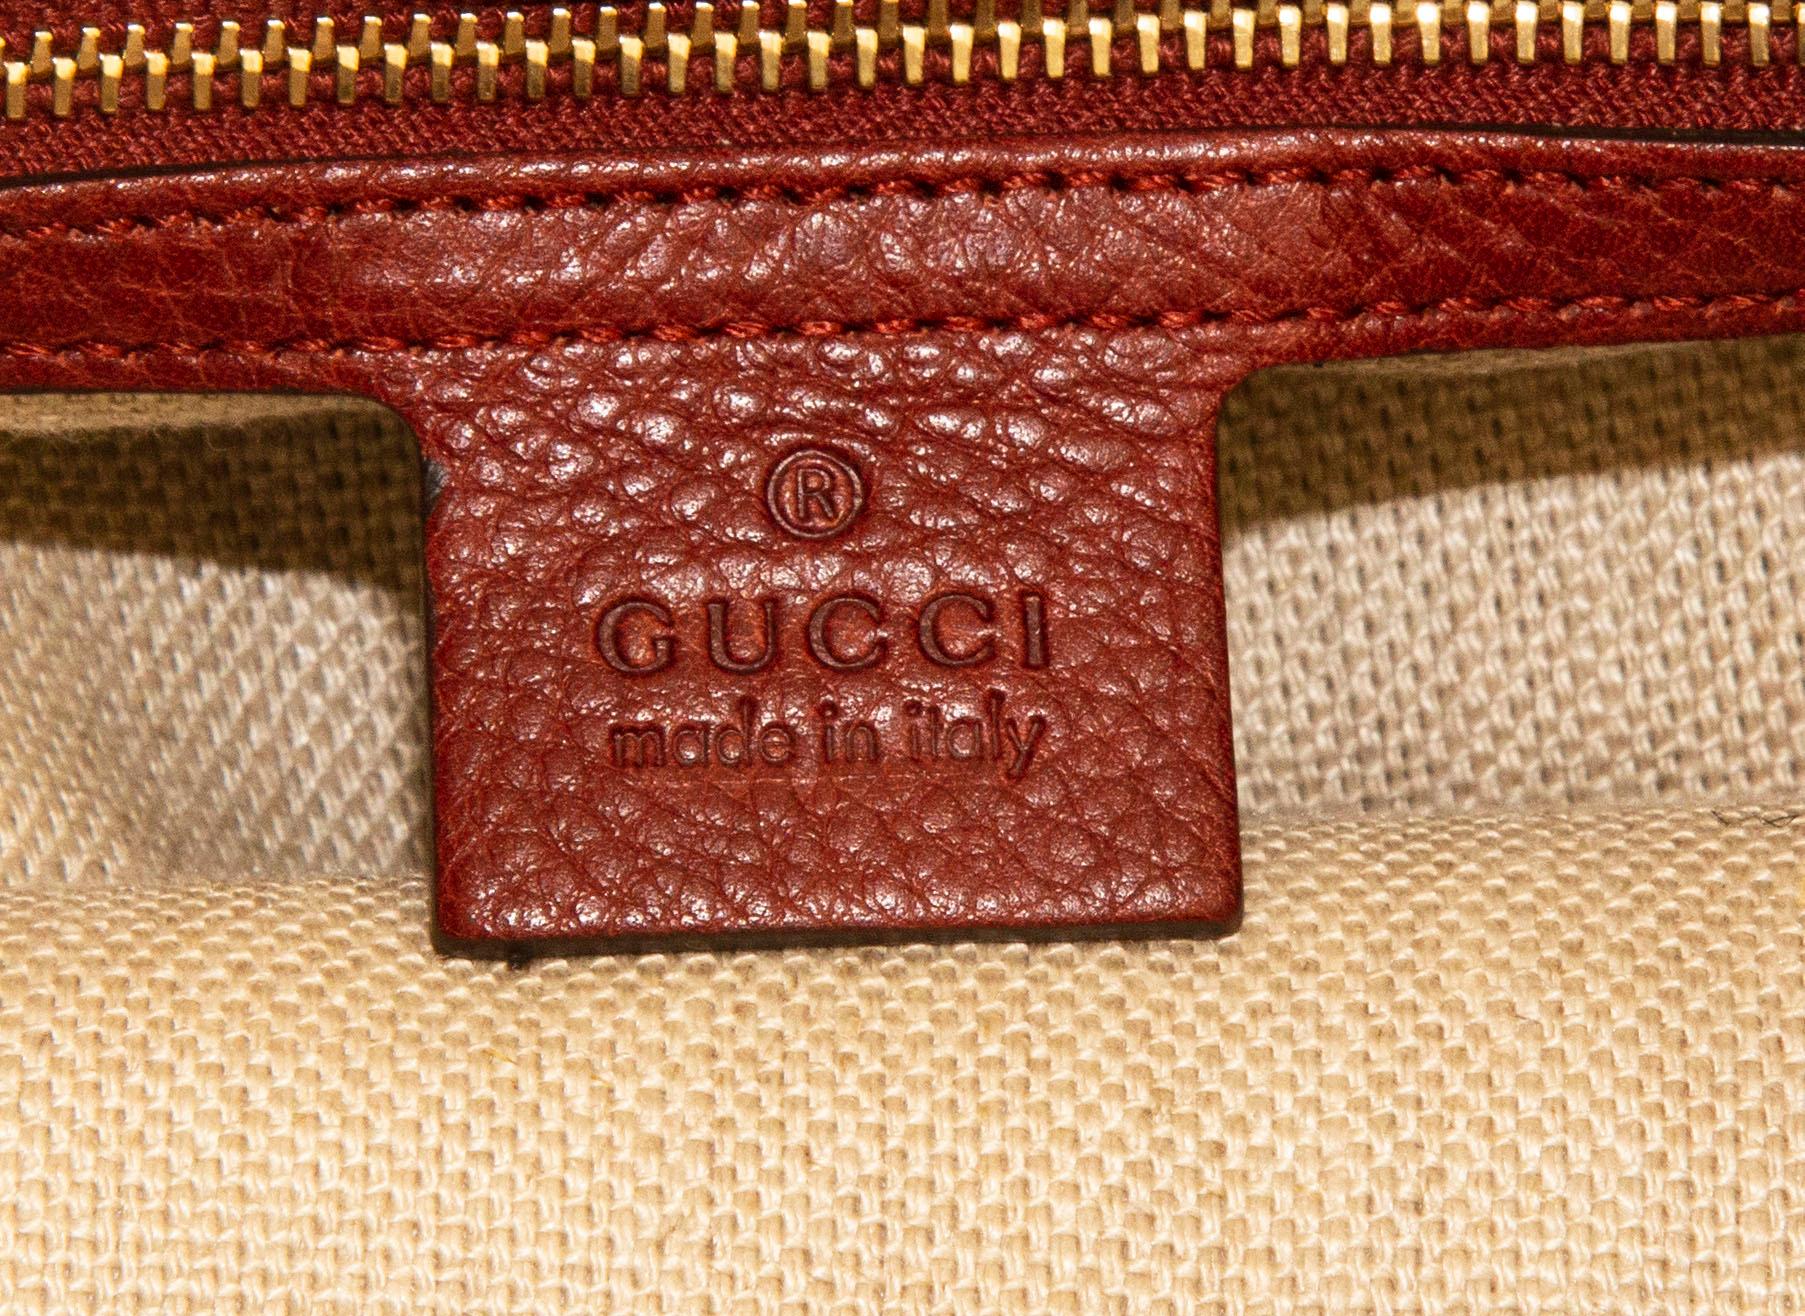 Gucci Marrakech Hobo Shoulder Bag in Earth Red Leather For Sale 6